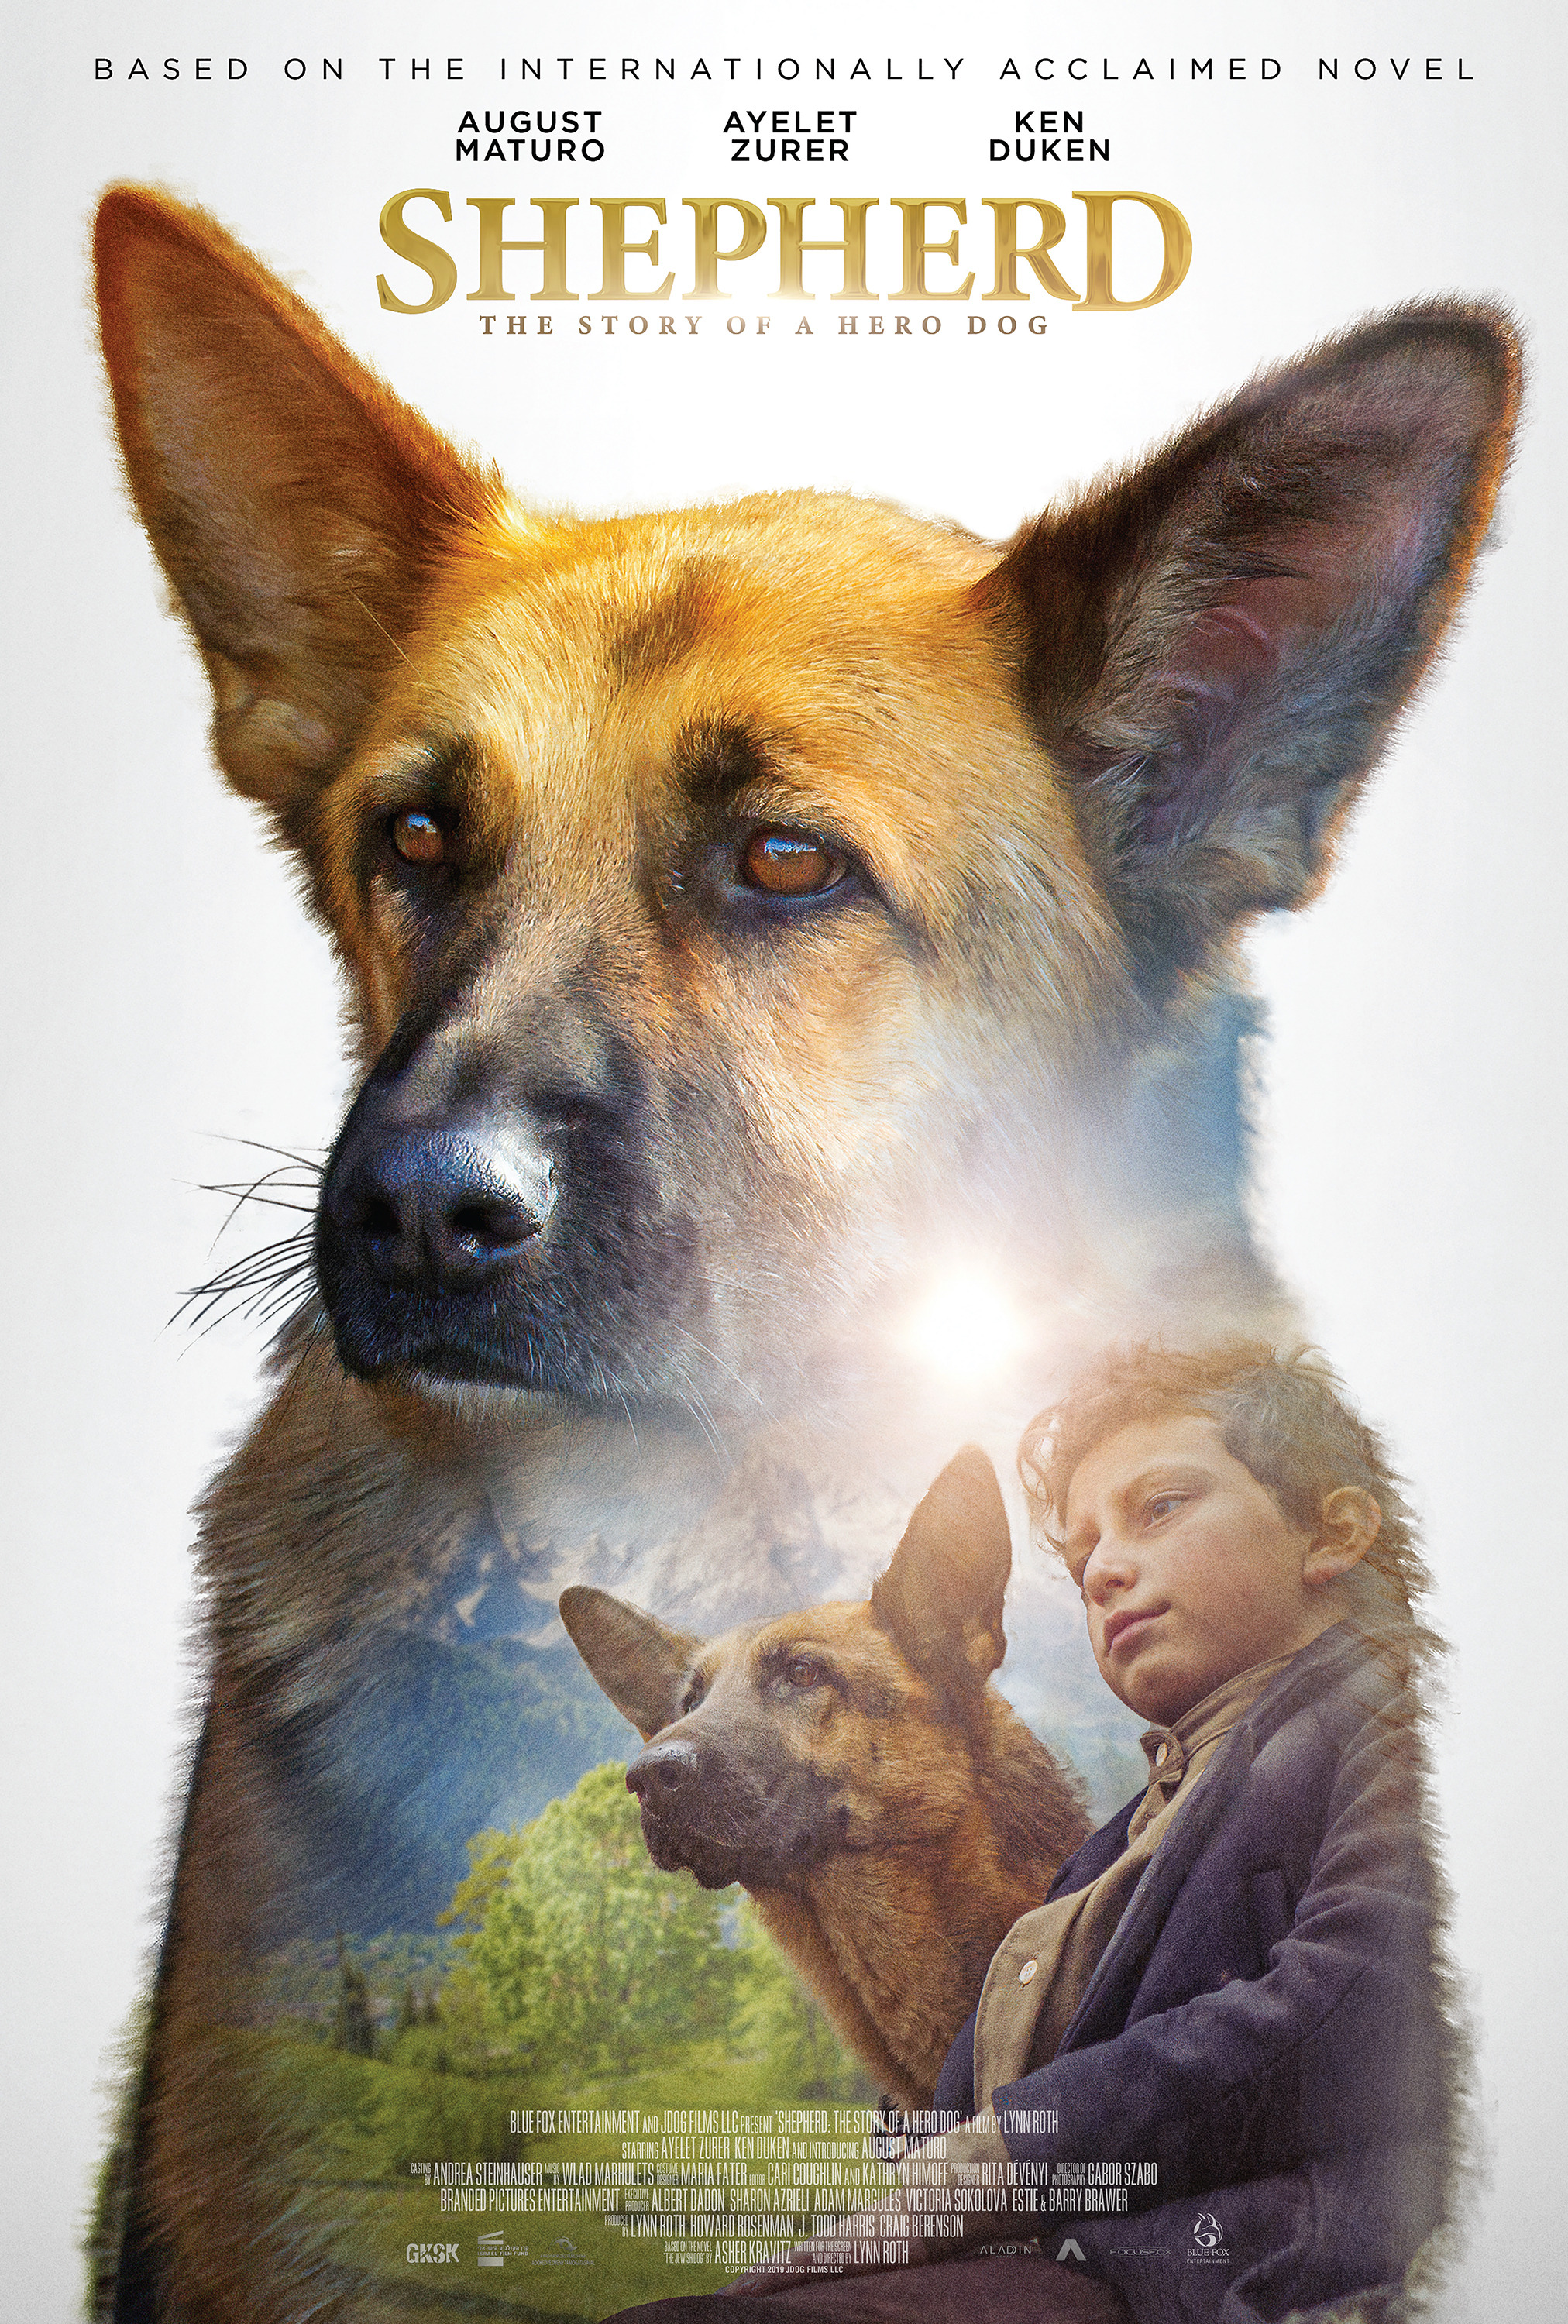 Mega Sized Movie Poster Image for SHEPHERD: The Story of a Jewish Dog (#2 of 2)